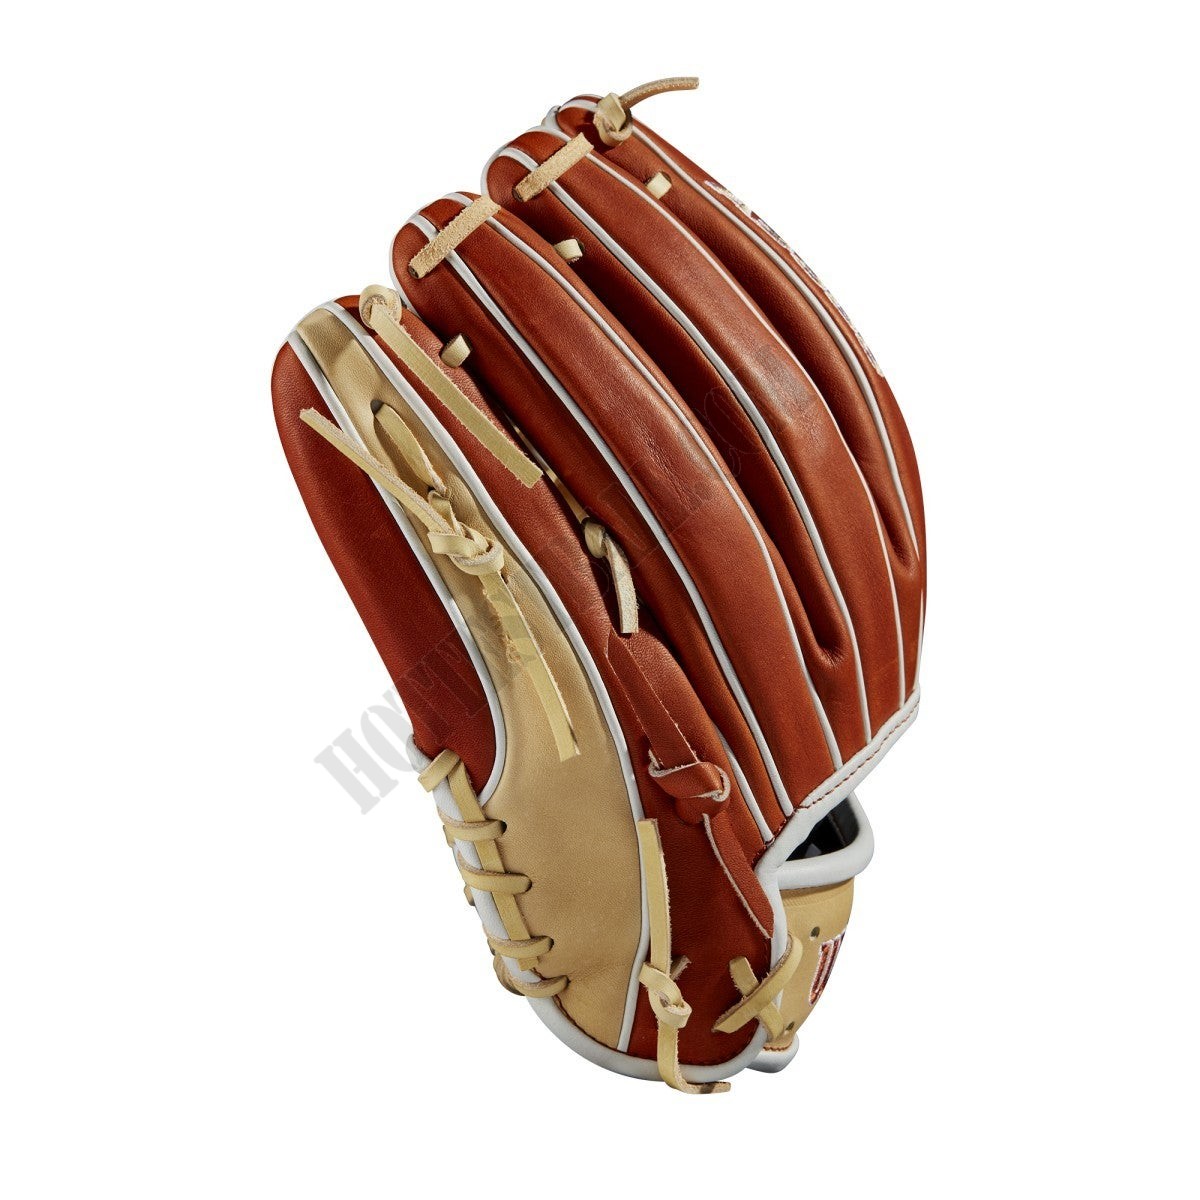 2021 A2000 1789 11.5" Utility Baseball Glove ● Wilson Promotions - -4